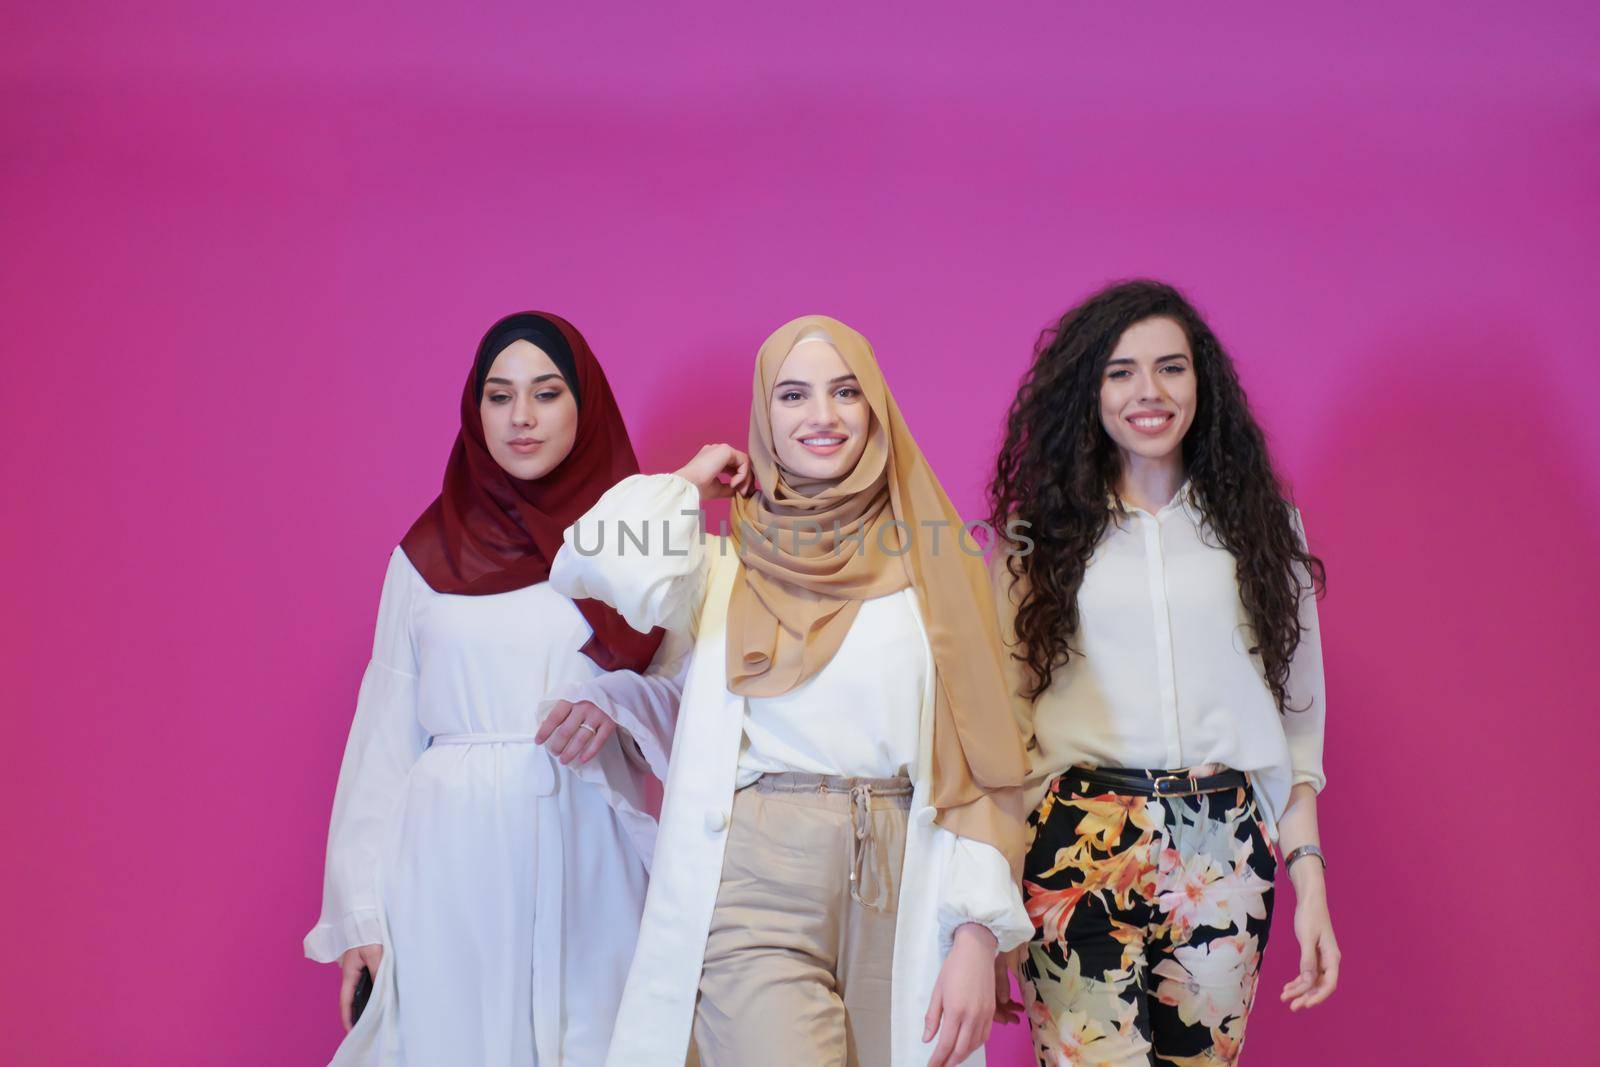 muslim women in fashionable dress isolated on pink by dotshock